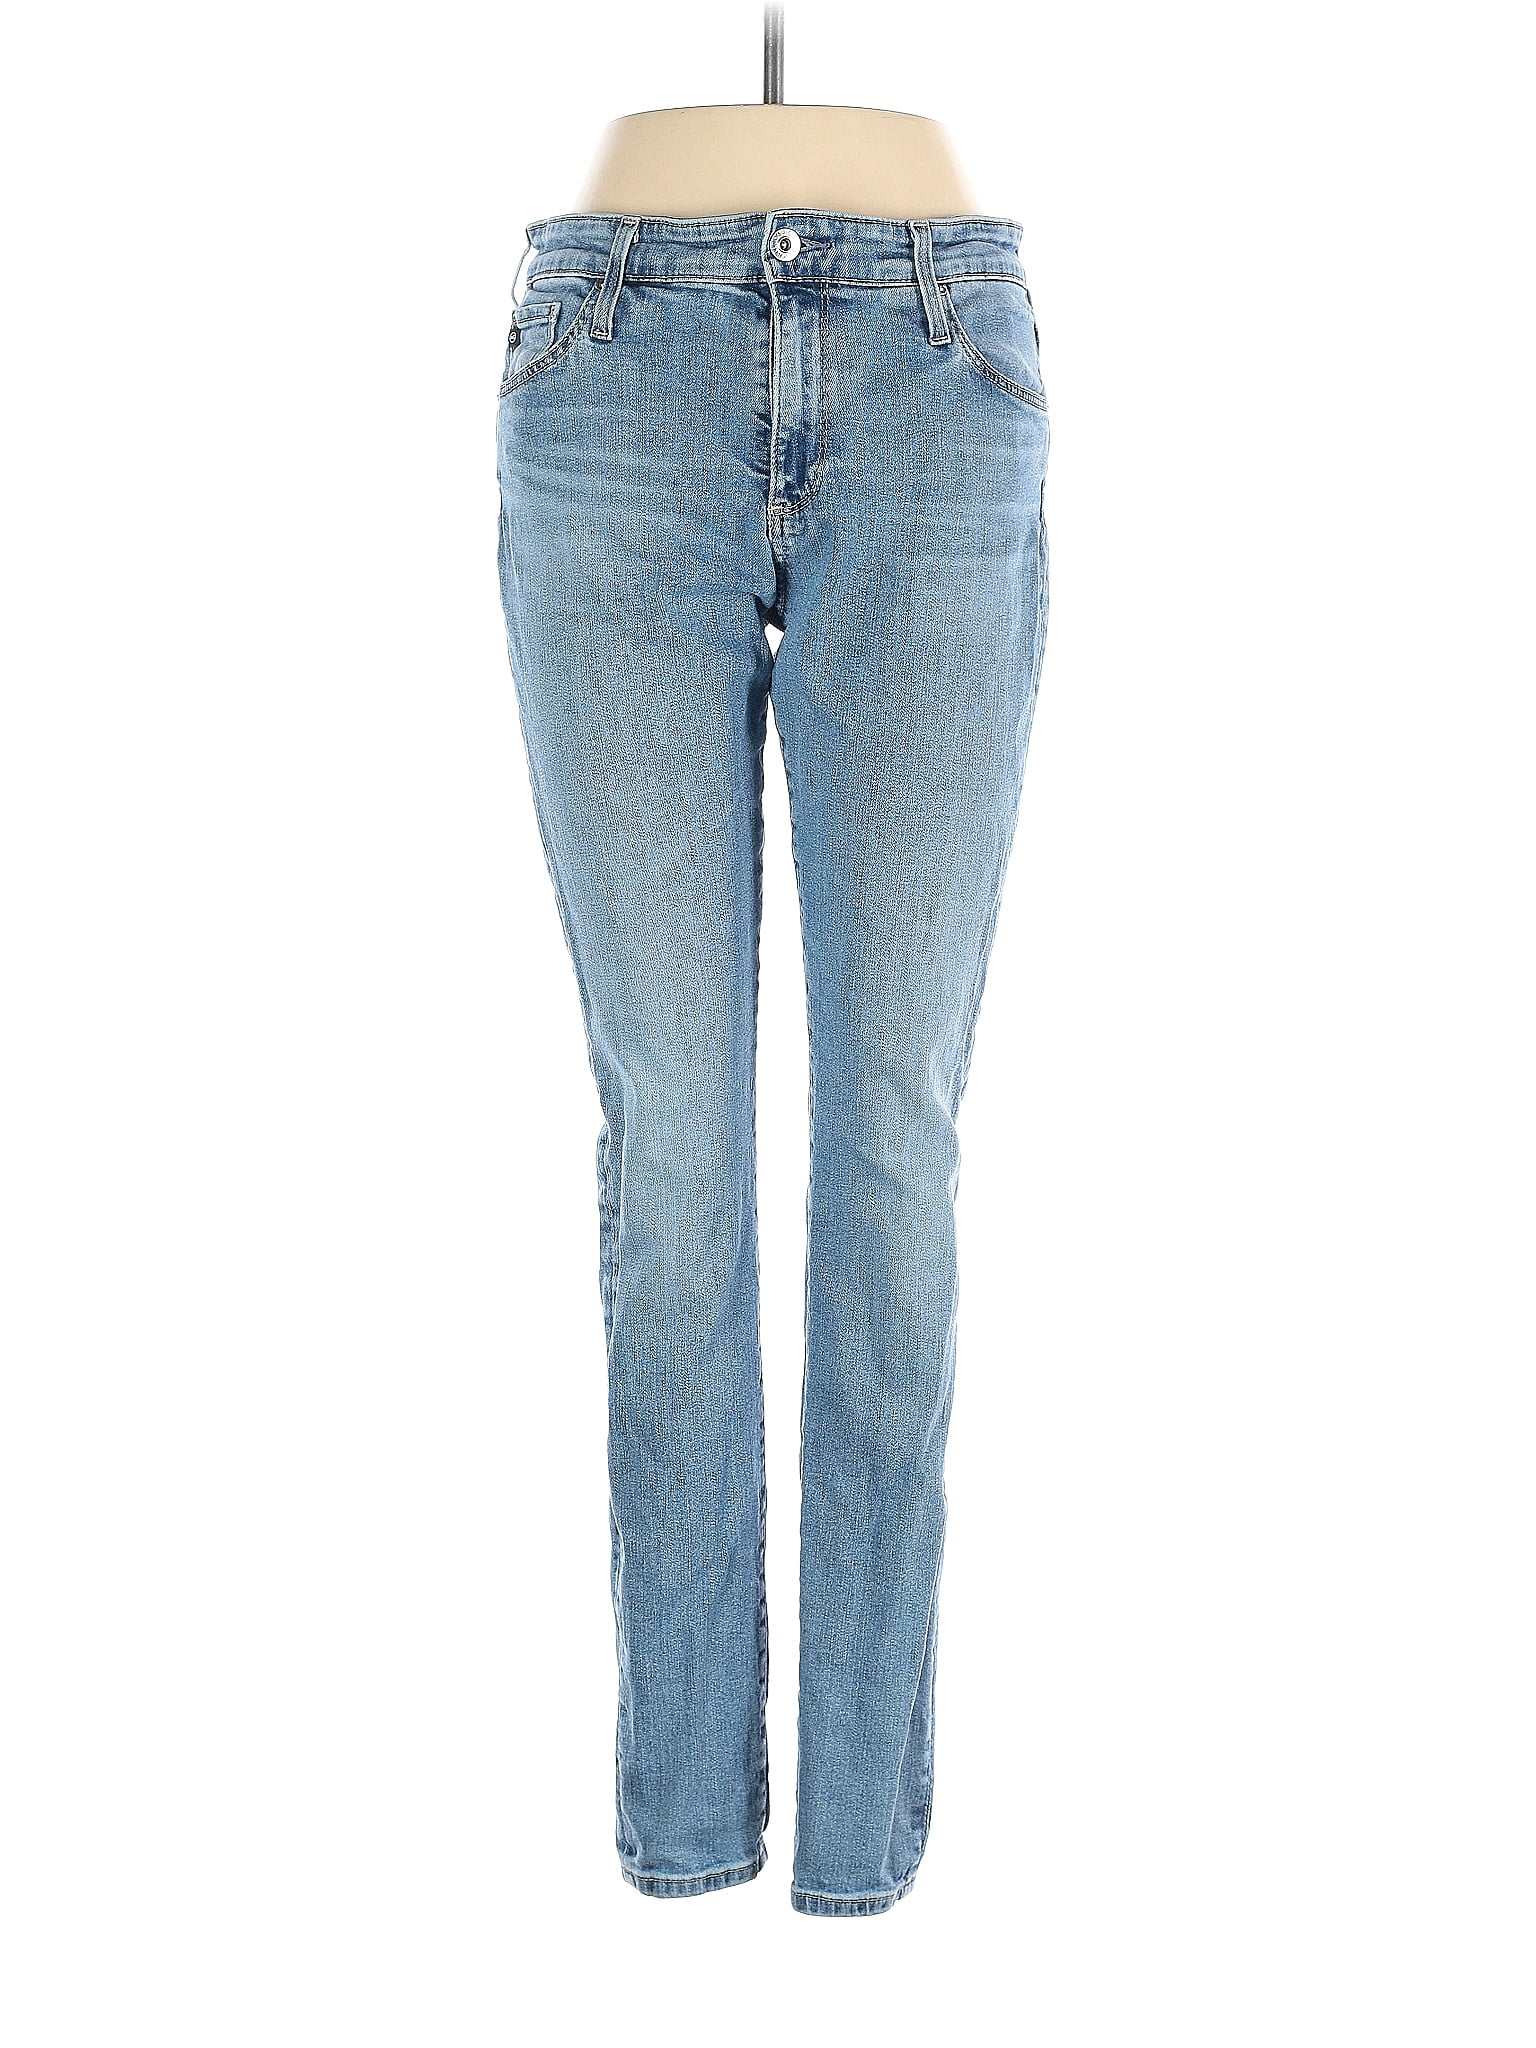 Adriano Goldschmied 100% Cotton Solid Blue Jeans 28 Waist - 80% off ...